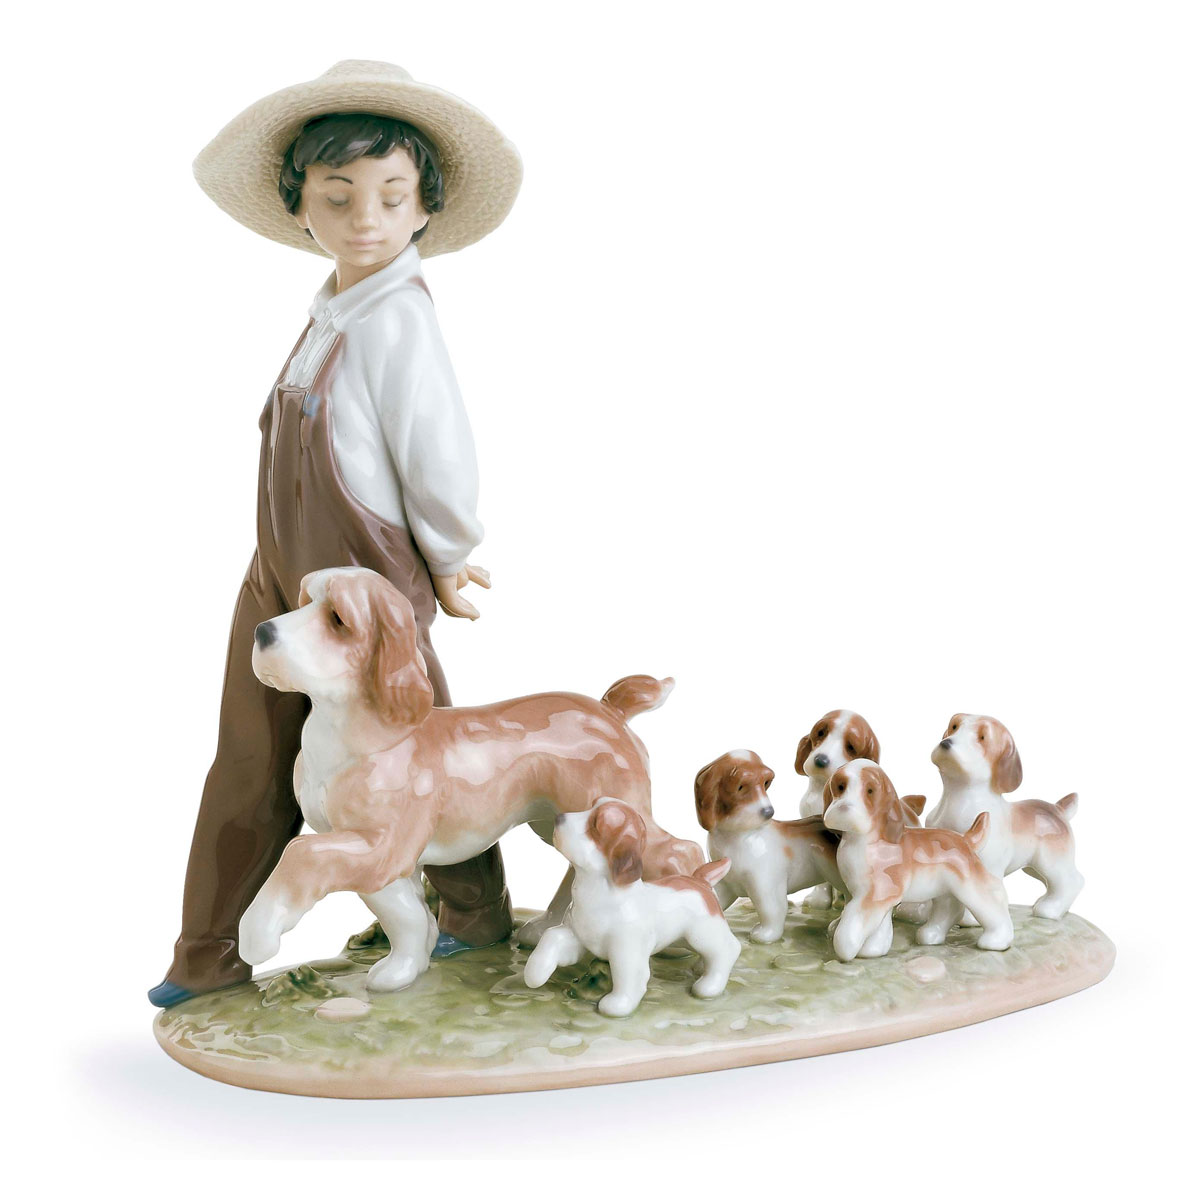 Lladro Classic Sculpture, My Little Explorers Boy With Dogs Figurine